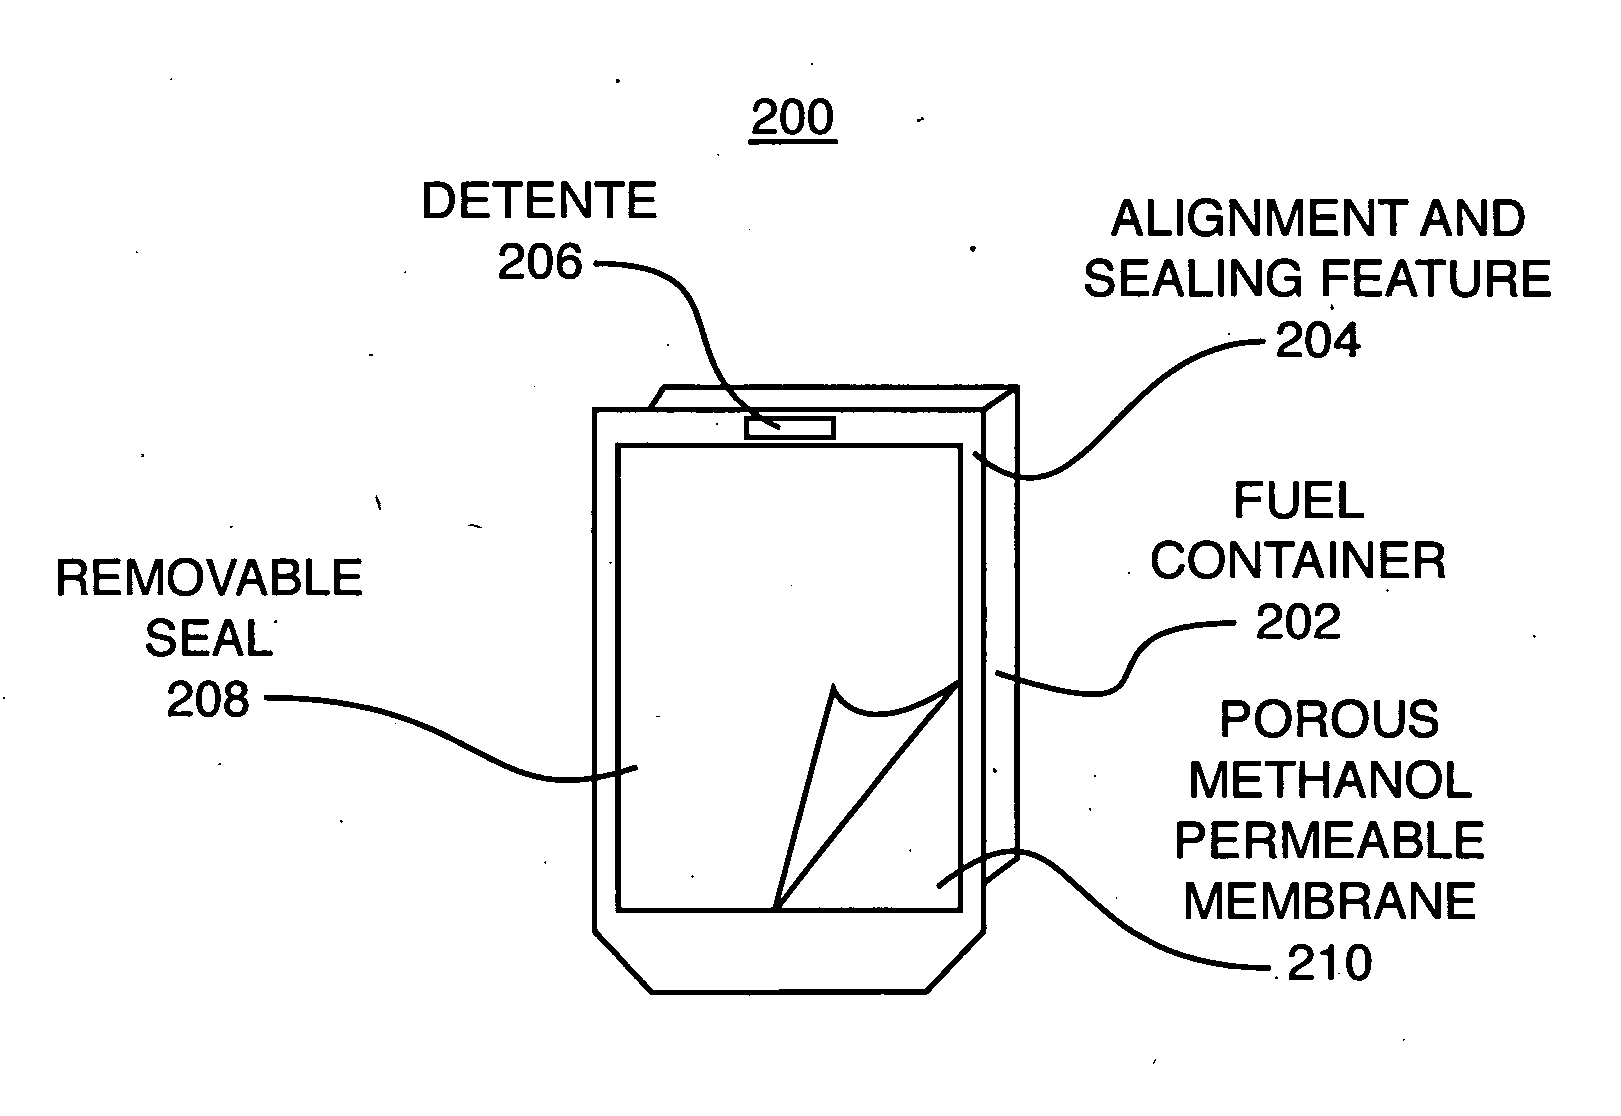 Fuel container with reticulated material